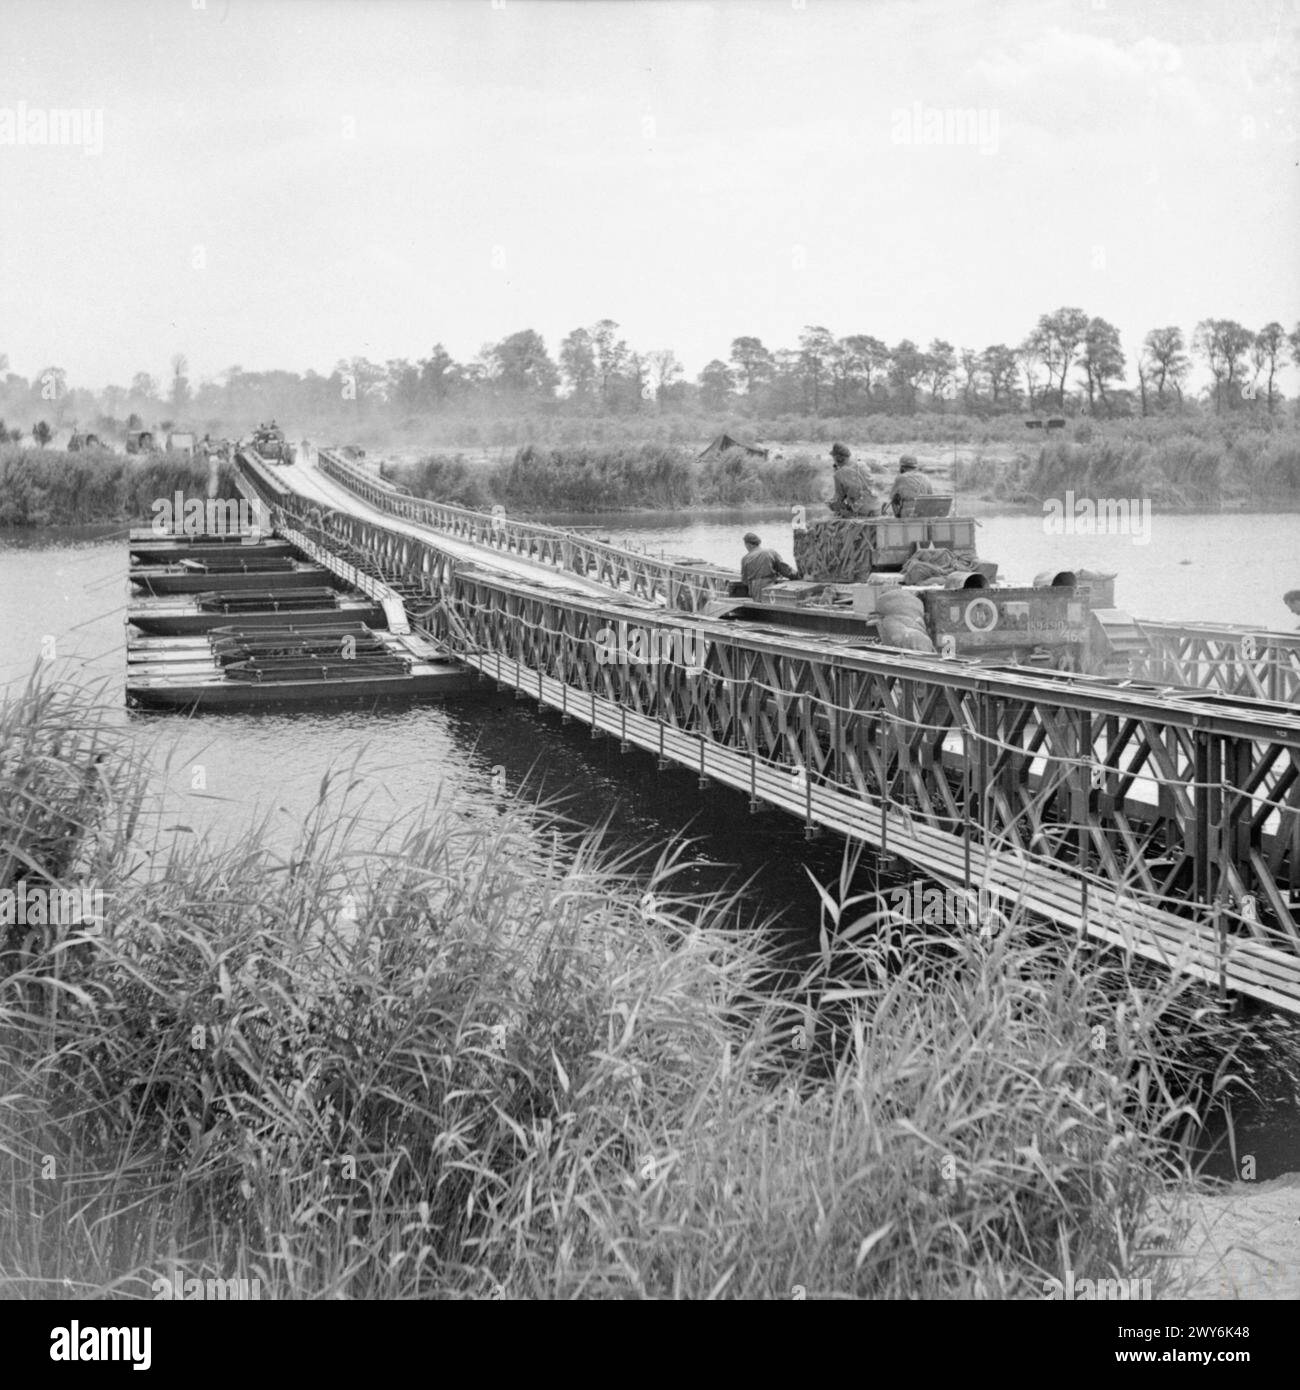 THE BRITISH ARMY IN NORMANDY 1944 - Cromwell tanks moving across 'York' bridge, a Bailey bridge over the Caen canal and the Orne river, during Operation 'Goodwood', 18 July 1944. , British Army Stock Photo